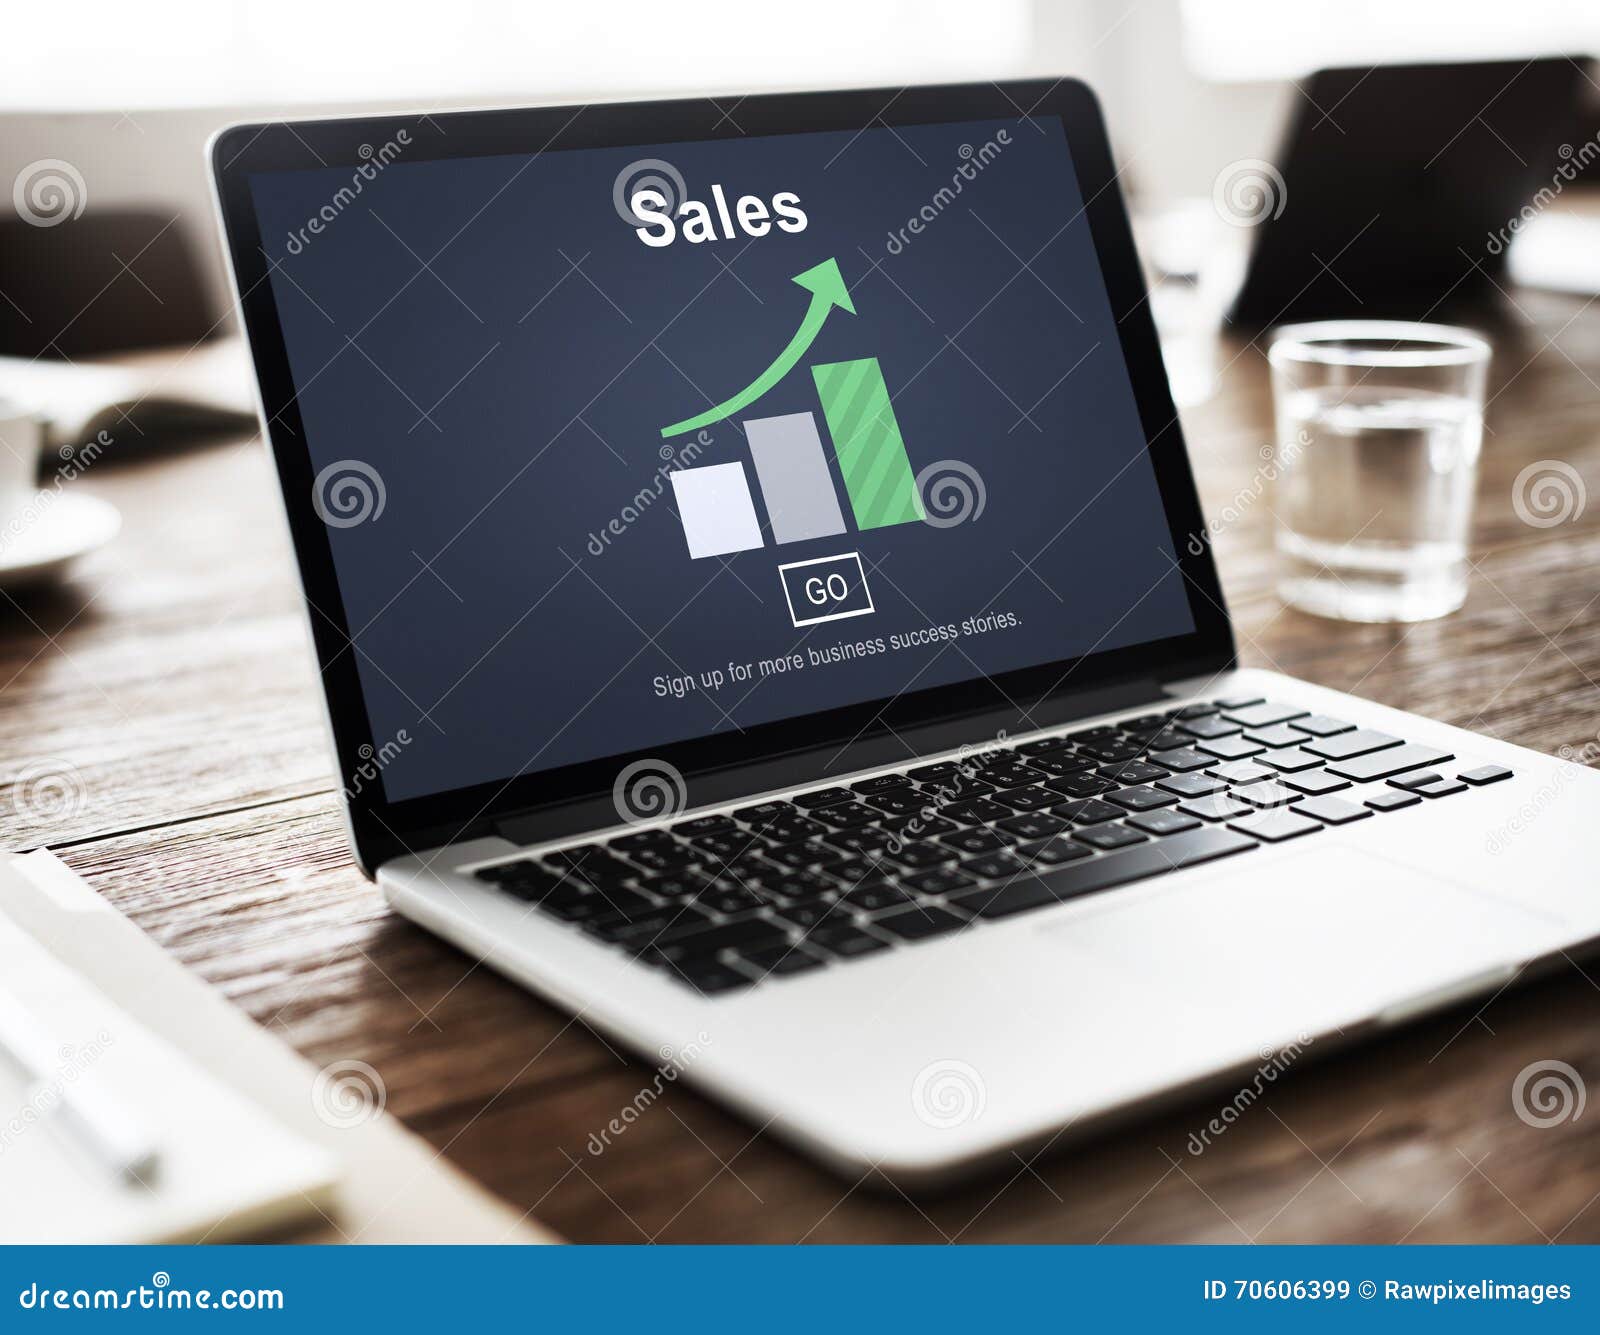 sales selling commerce cost marketing retail sell concept